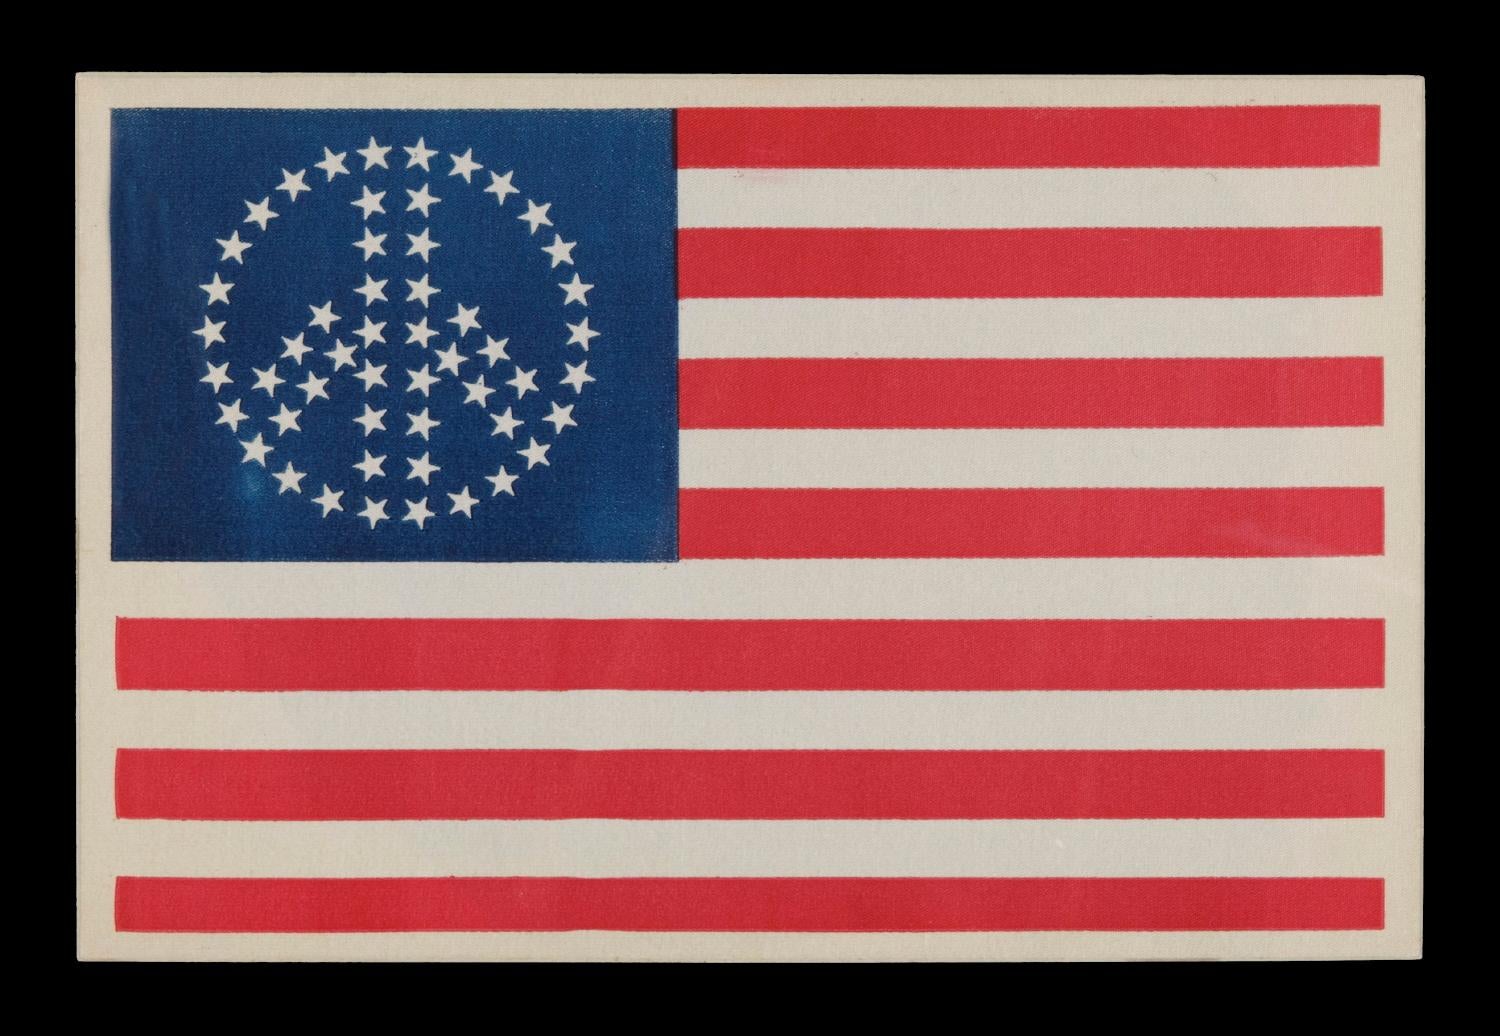 52 STAR AMERICAN FLAG CLOTH JACKET EMBLEM WITH PEACE SYMBOL CONFIGURATION, CA 1964-1975 

This unusual flag image is great for two reasons. One is the rather obvious fact that its stars are arranged in the form of the international symbol for peace,